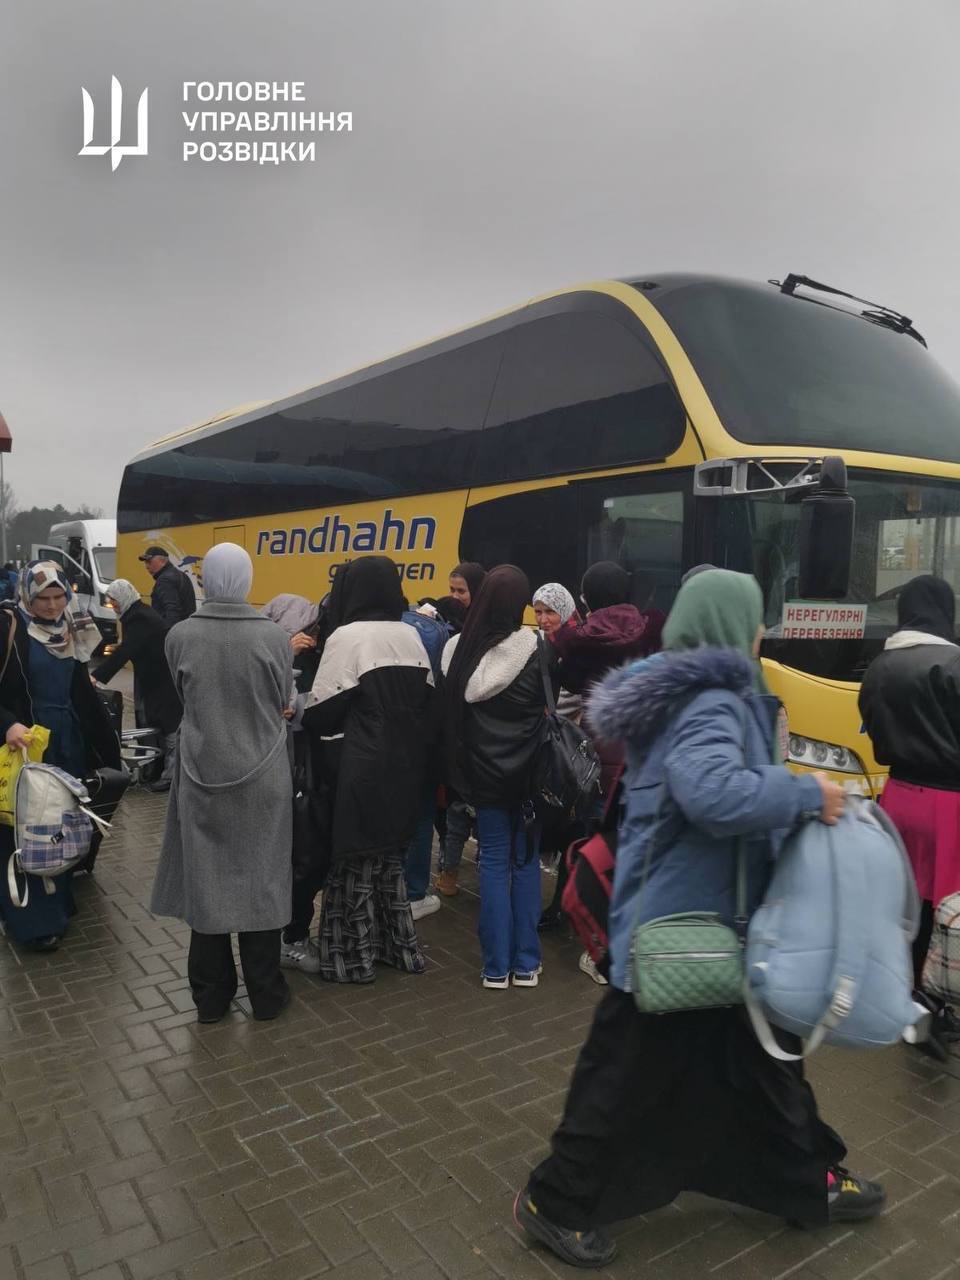 Another 47 citizens of Ukraine were evacuated from Gaza: the route passed through a famous Egyptian resort. Photos